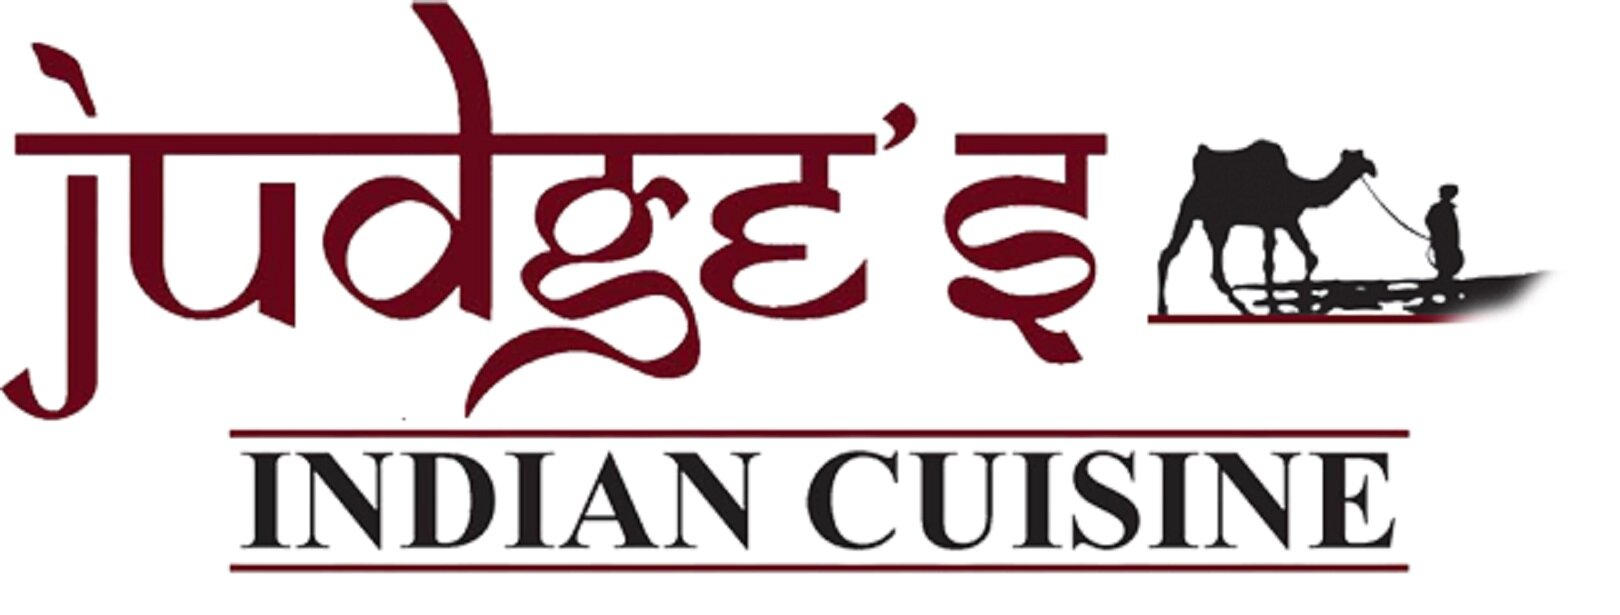 Owned by Mr. Sukh Judge, Judges Indian Cuisine is rated as one of the best indian cuisine / restaurant in Vancouver. We are serving authentic Indian Cuisine.